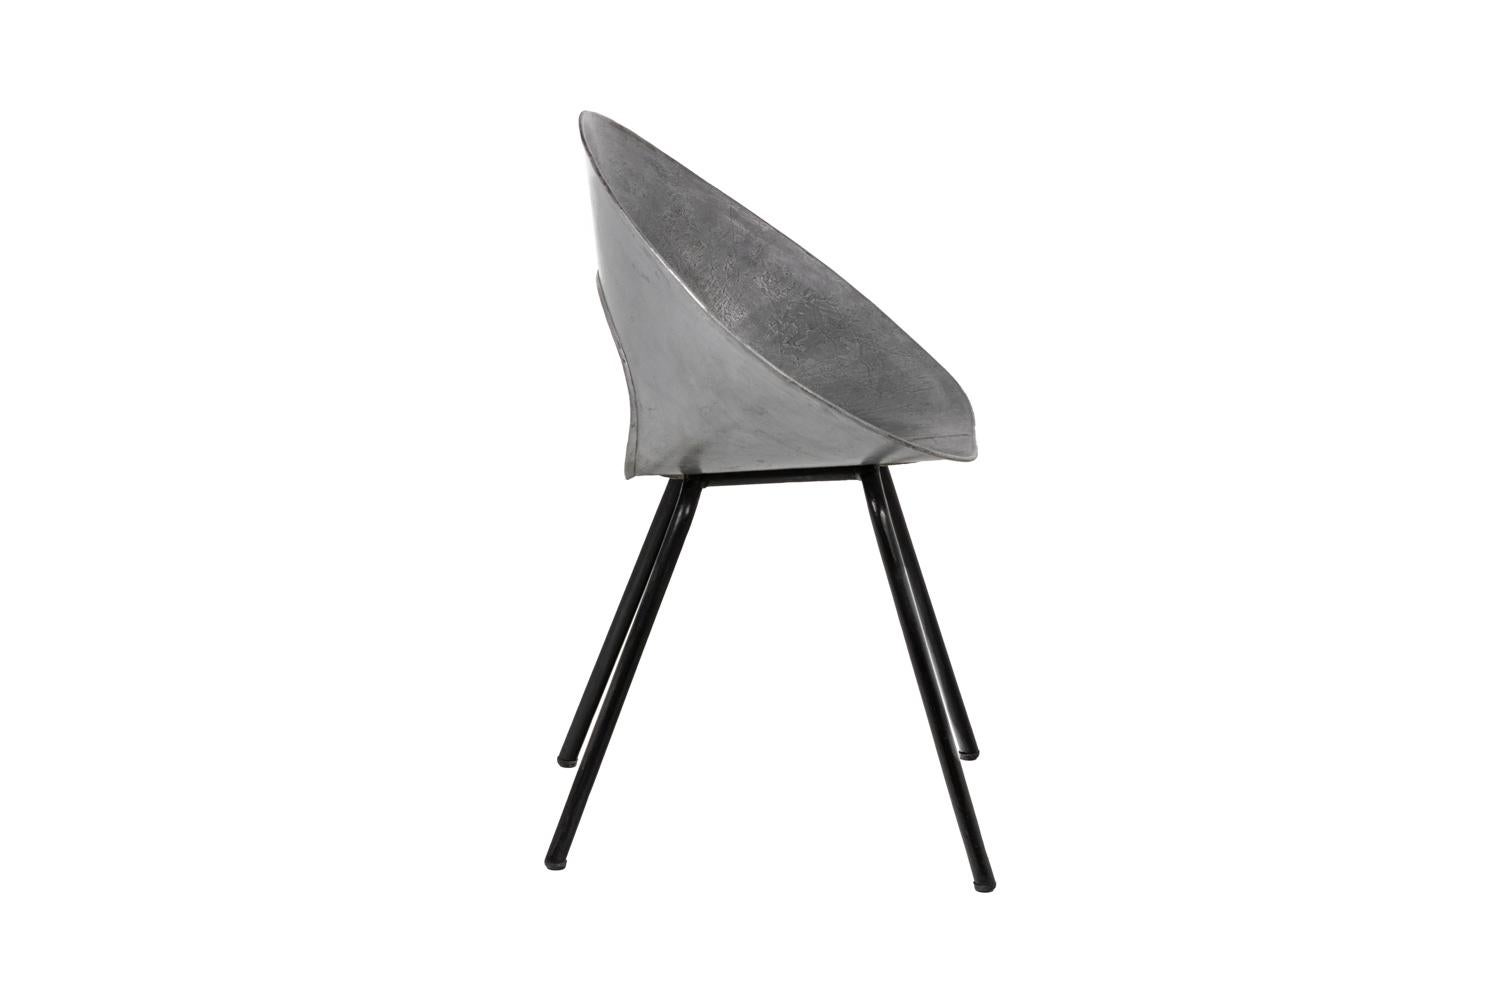 Other Donald Knorr, Chair 132U in Metal, 1950's